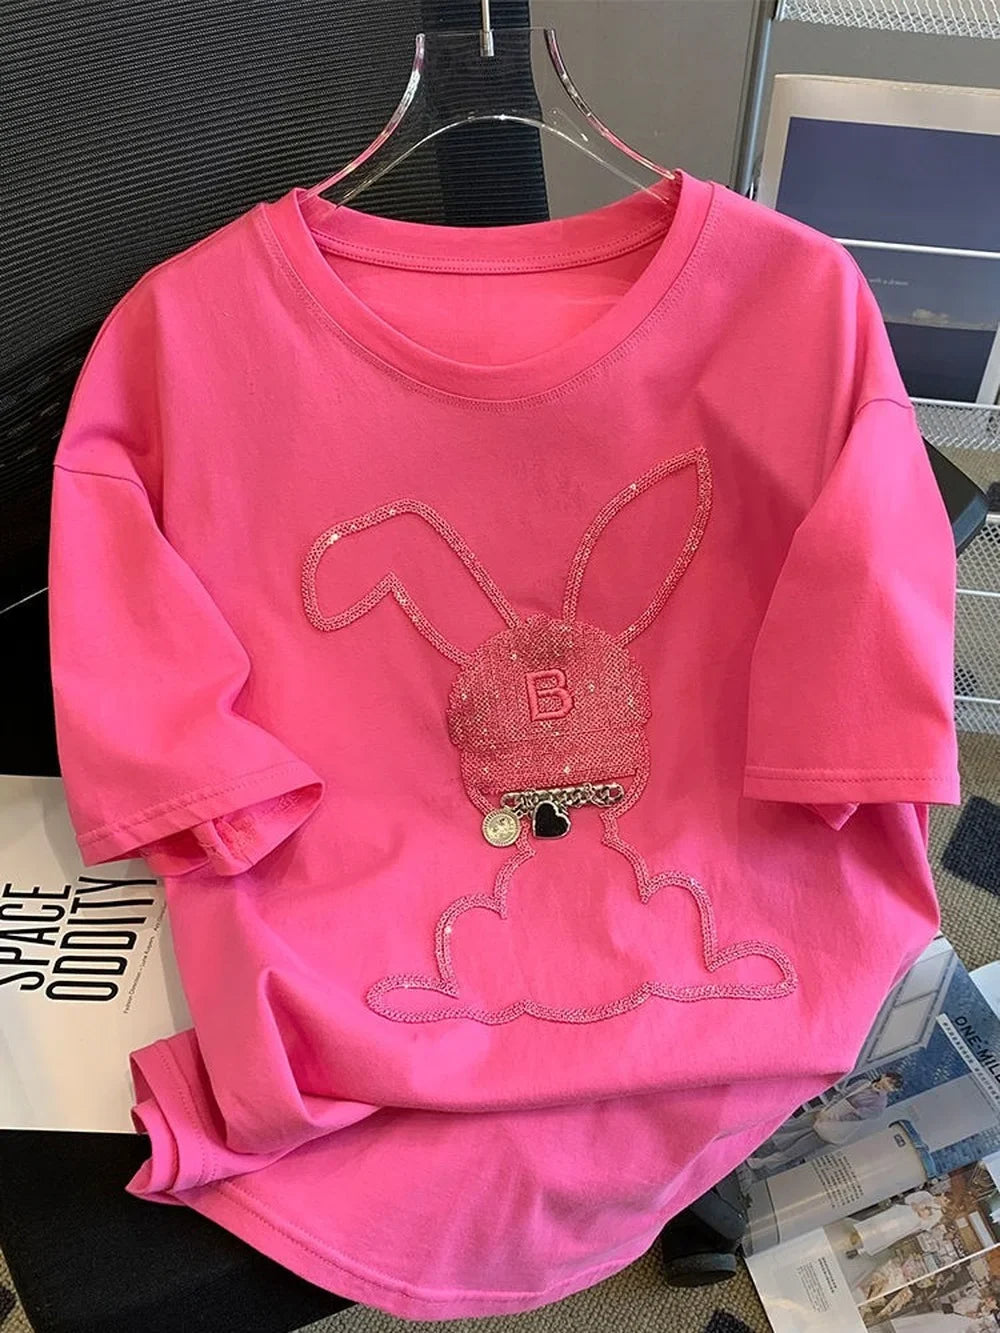 Rose Pink Sequined Bunny T-Shirt - Summer Cotton Y2k Kawaii Top for Women - T-Shirts - Shirts & Tops - 5 - 2024